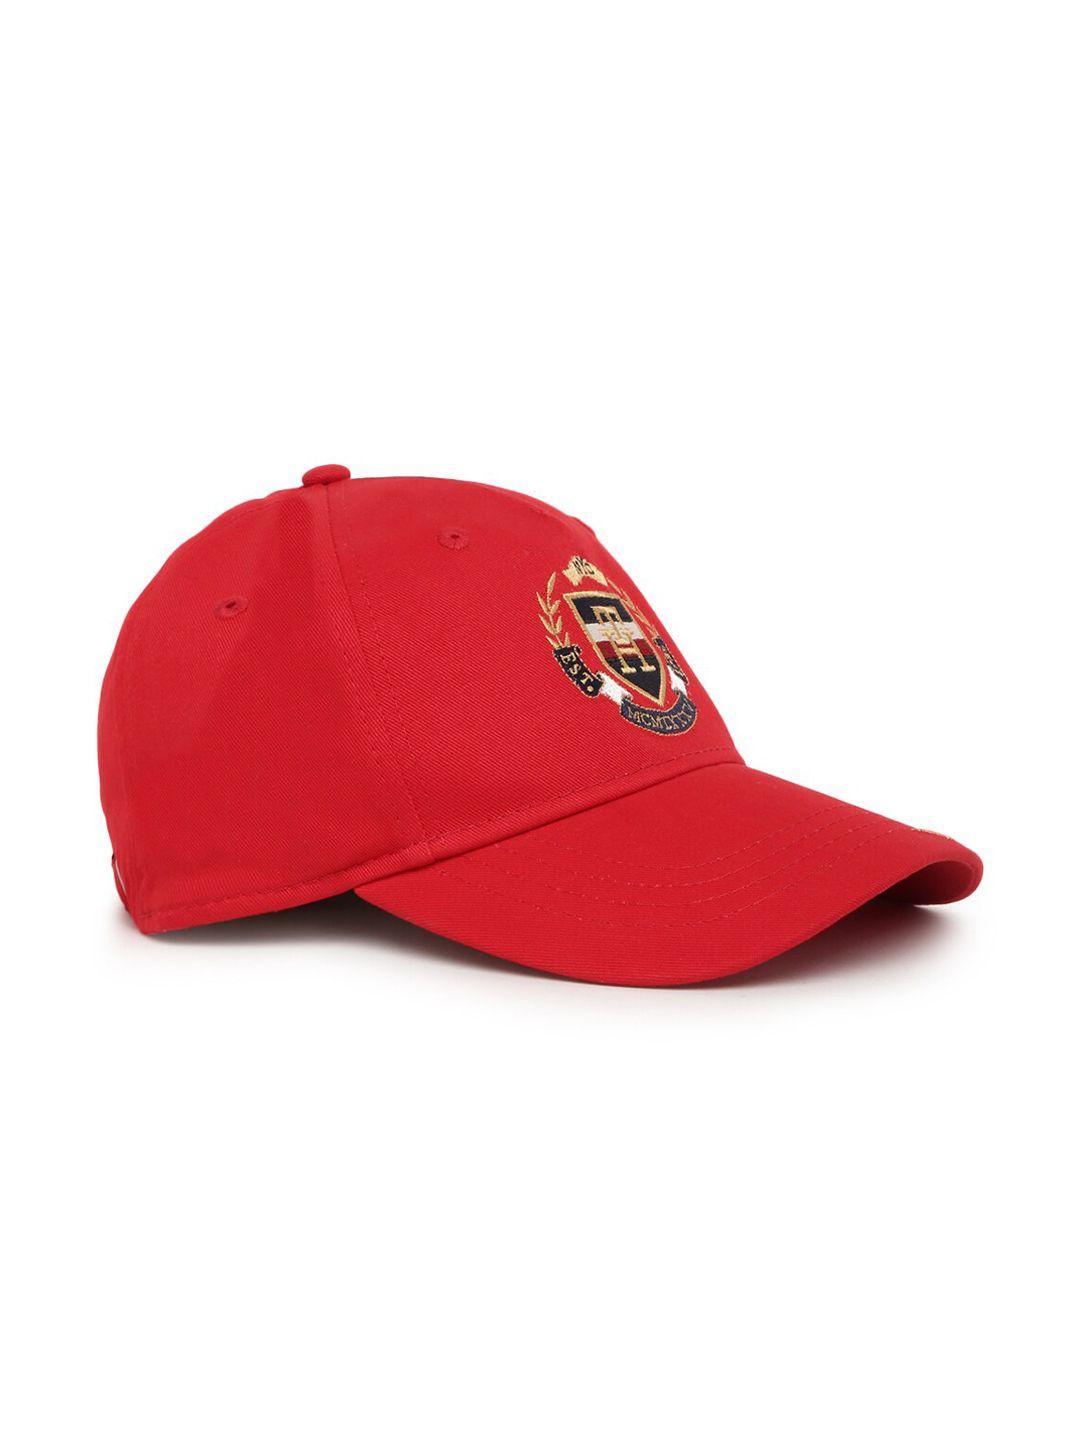 tommy hilfiger men embroidered pure cotton baseball cap